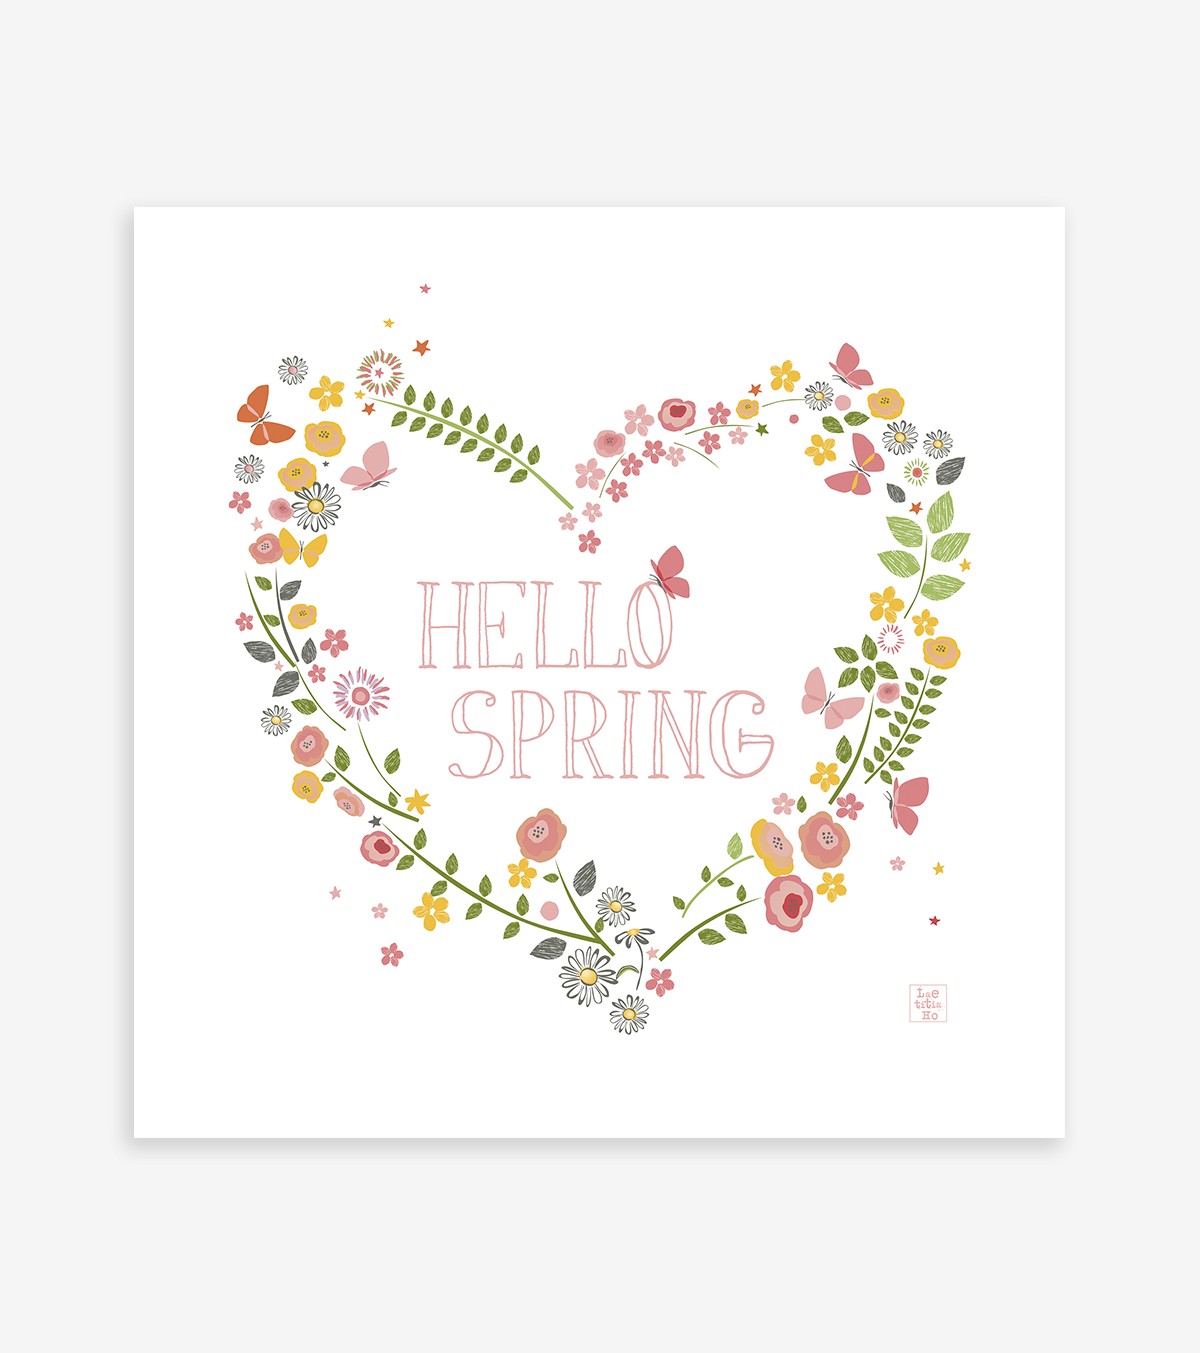 HELLO SPRING - Children's poster - Hearts in bloom